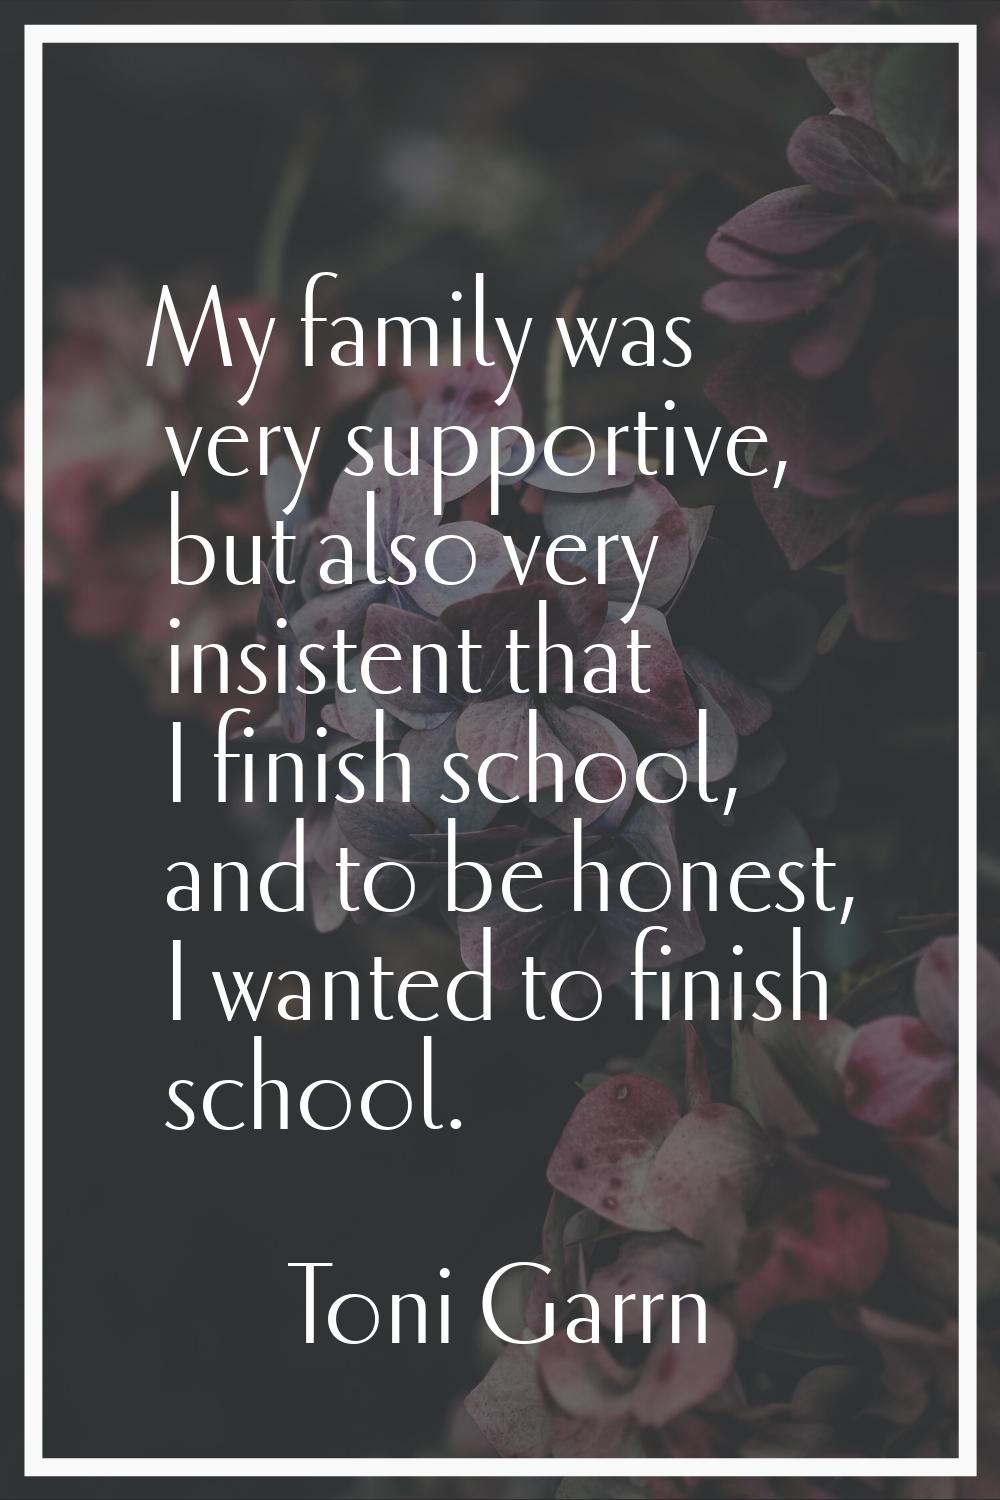 My family was very supportive, but also very insistent that I finish school, and to be honest, I wa